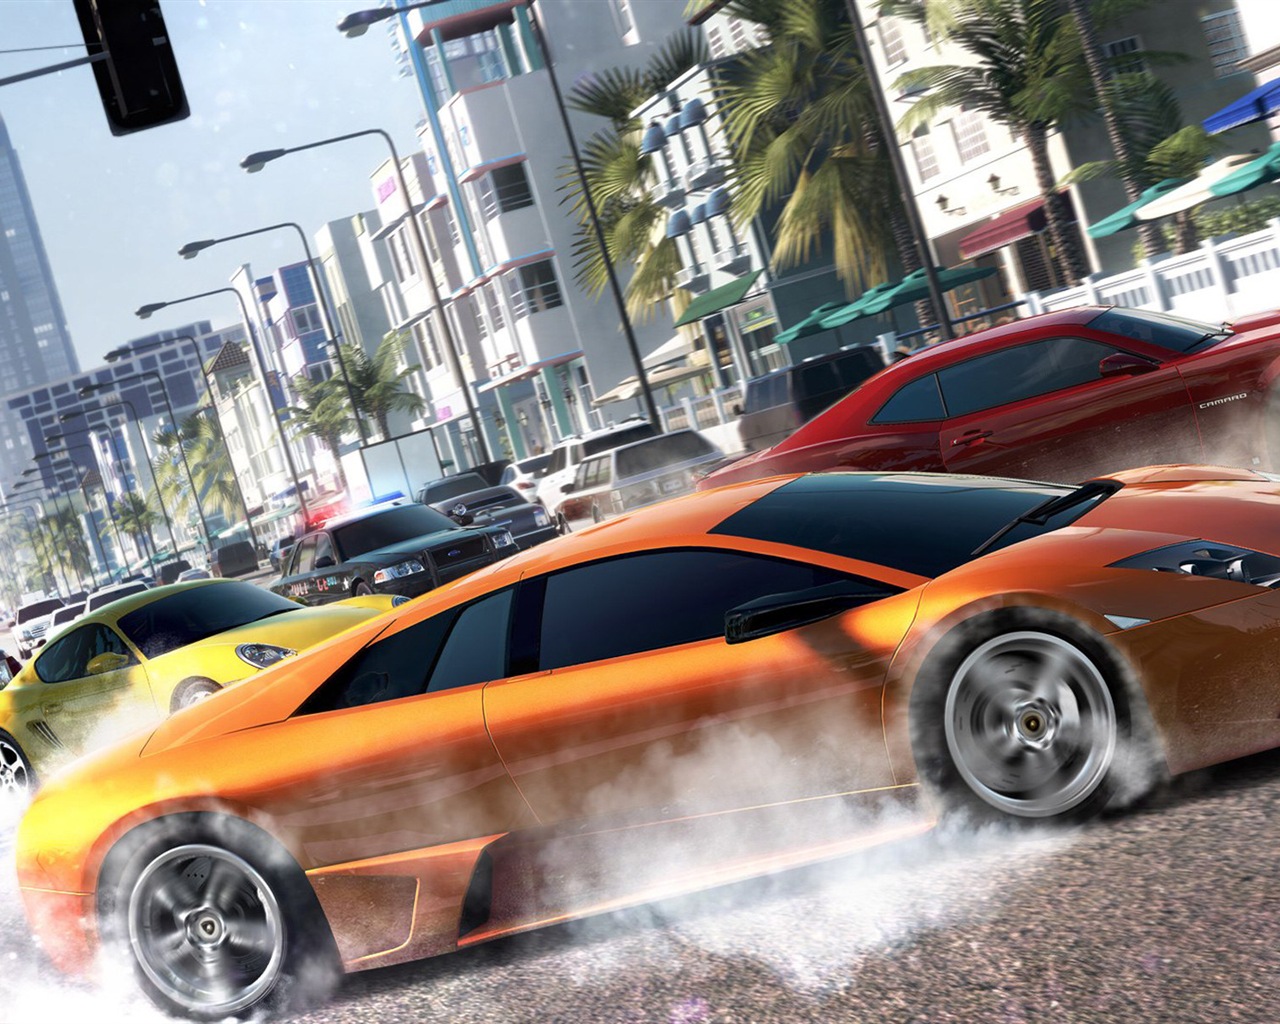 The Crew game HD wallpapers #1 - 1280x1024